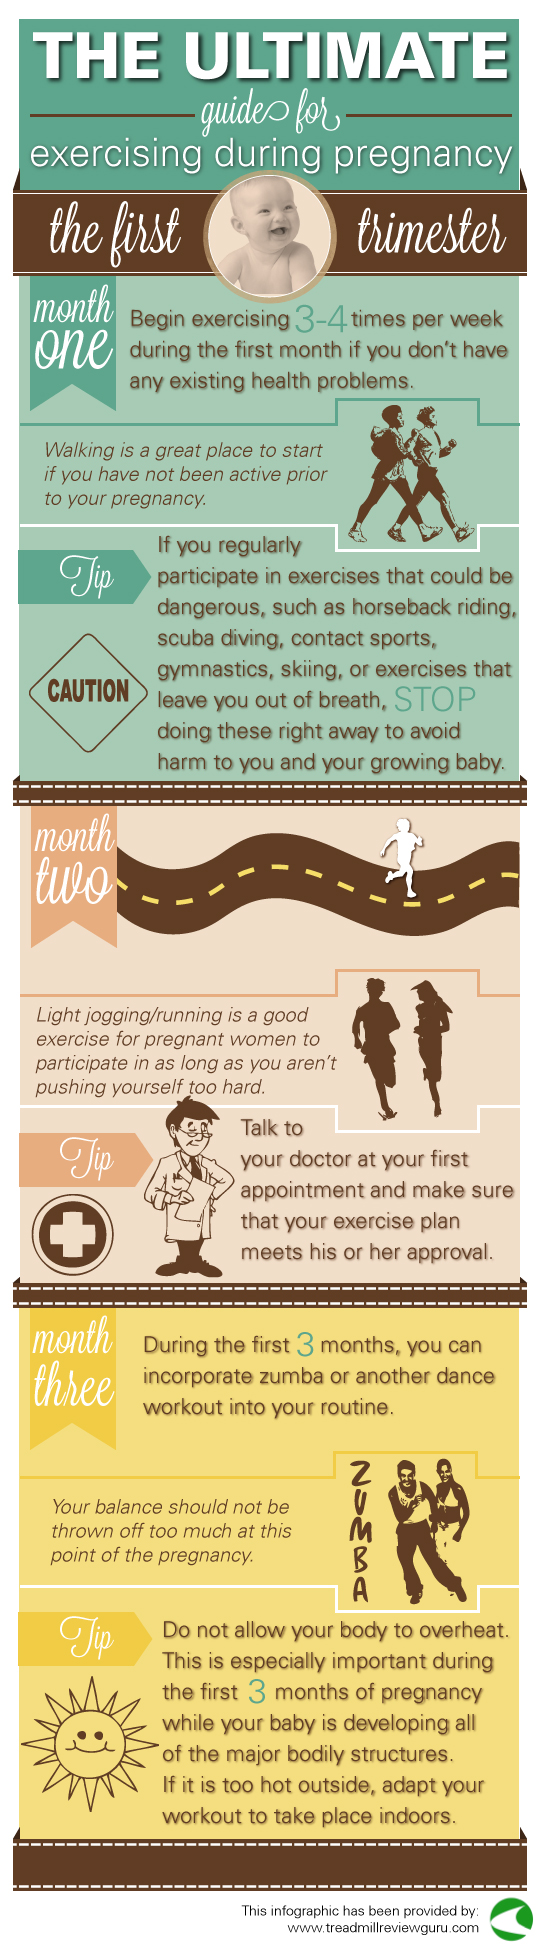 The Ultimate Guide for Exercising During Pregnancy (1st Trimester